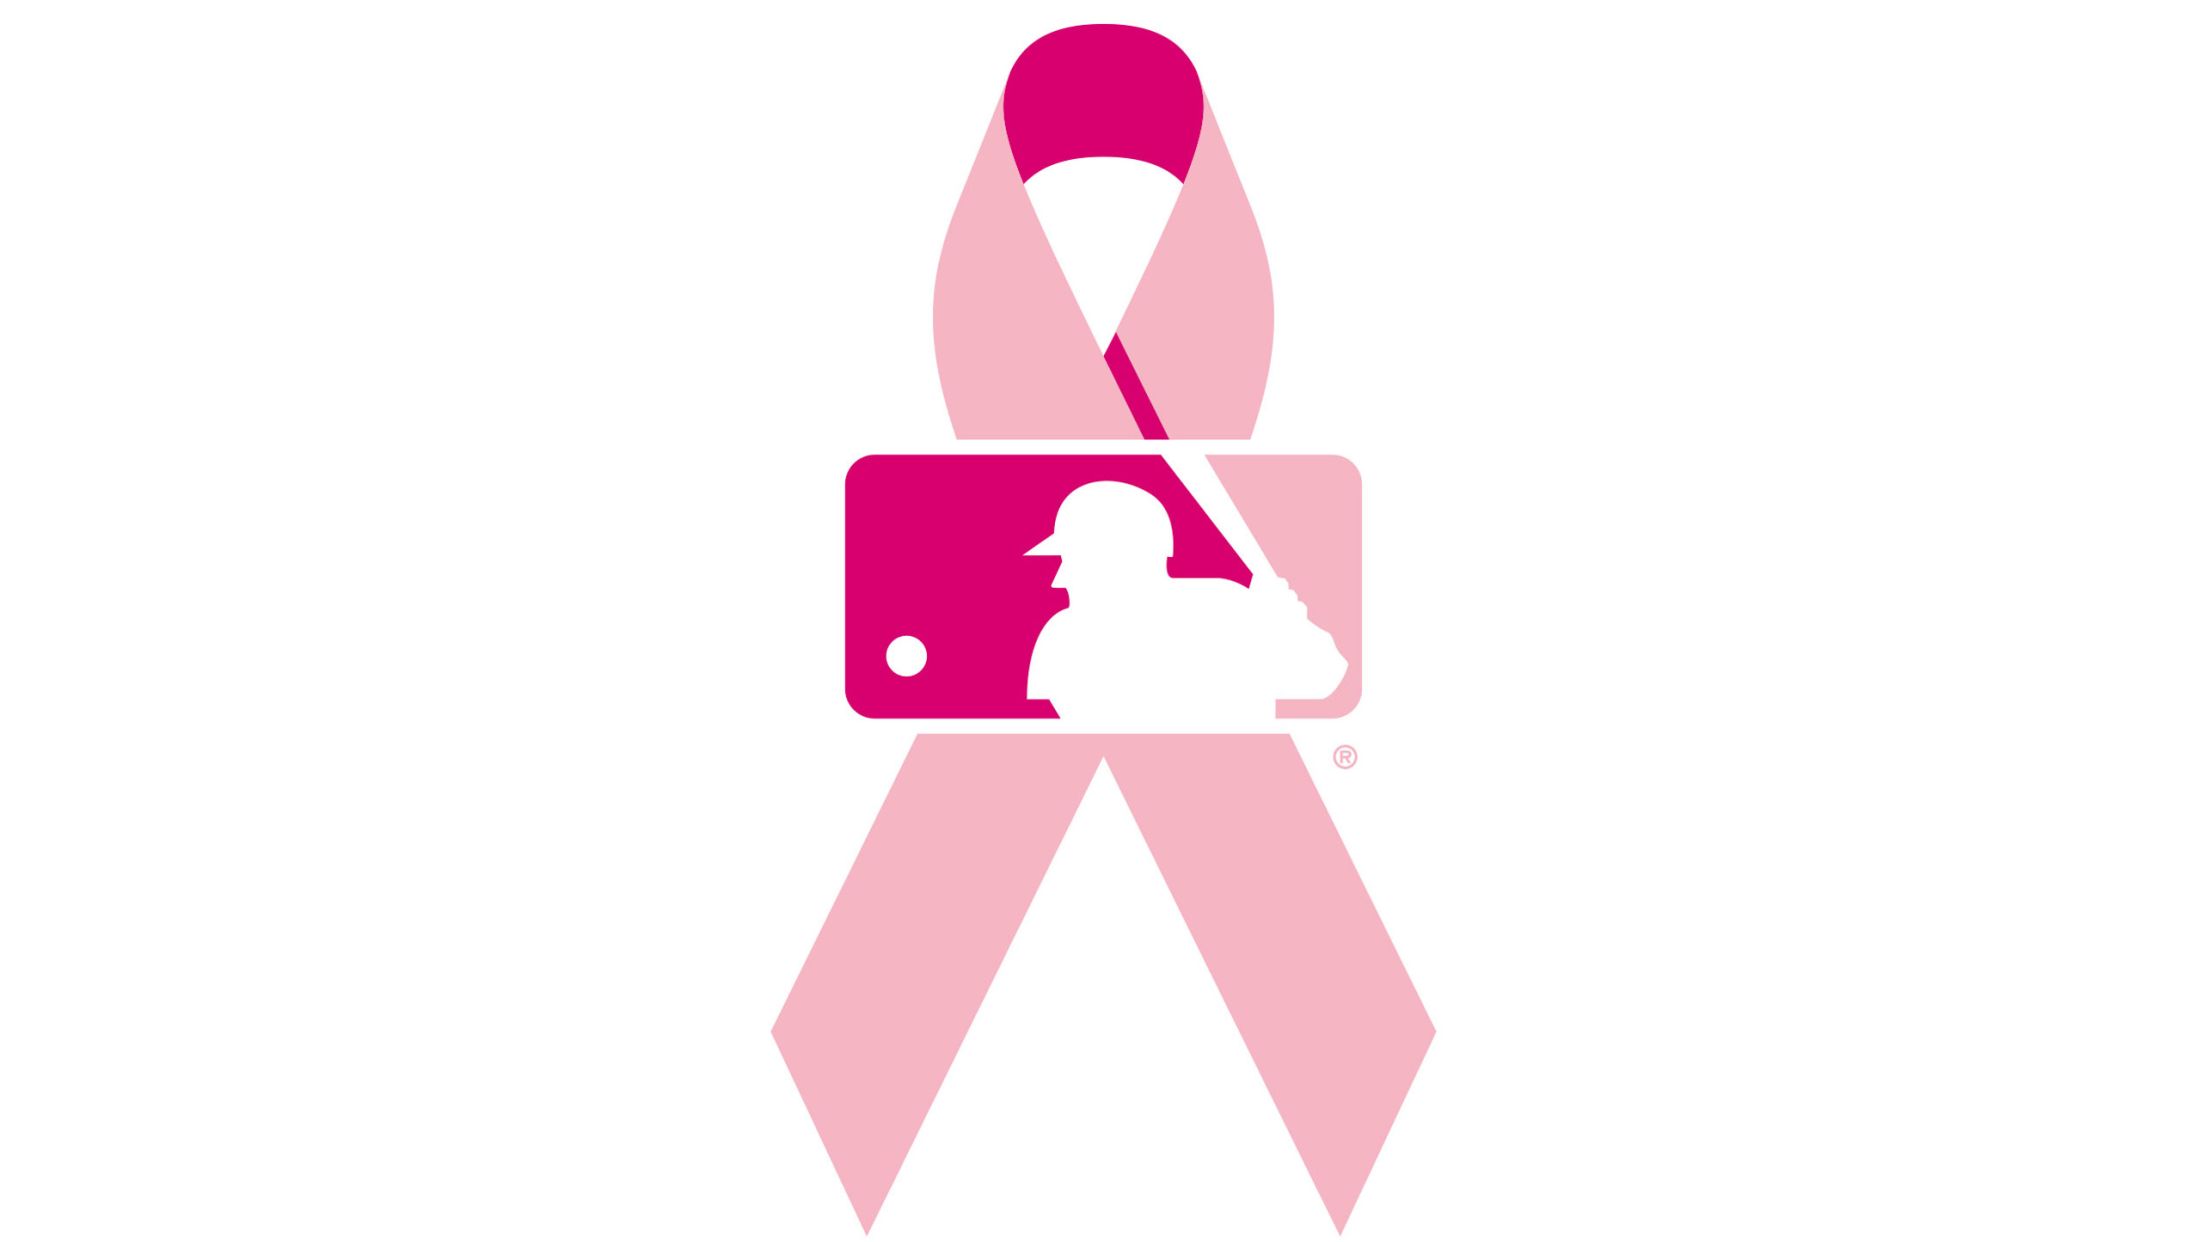 MLB goes pink for Mother's Day, good cause